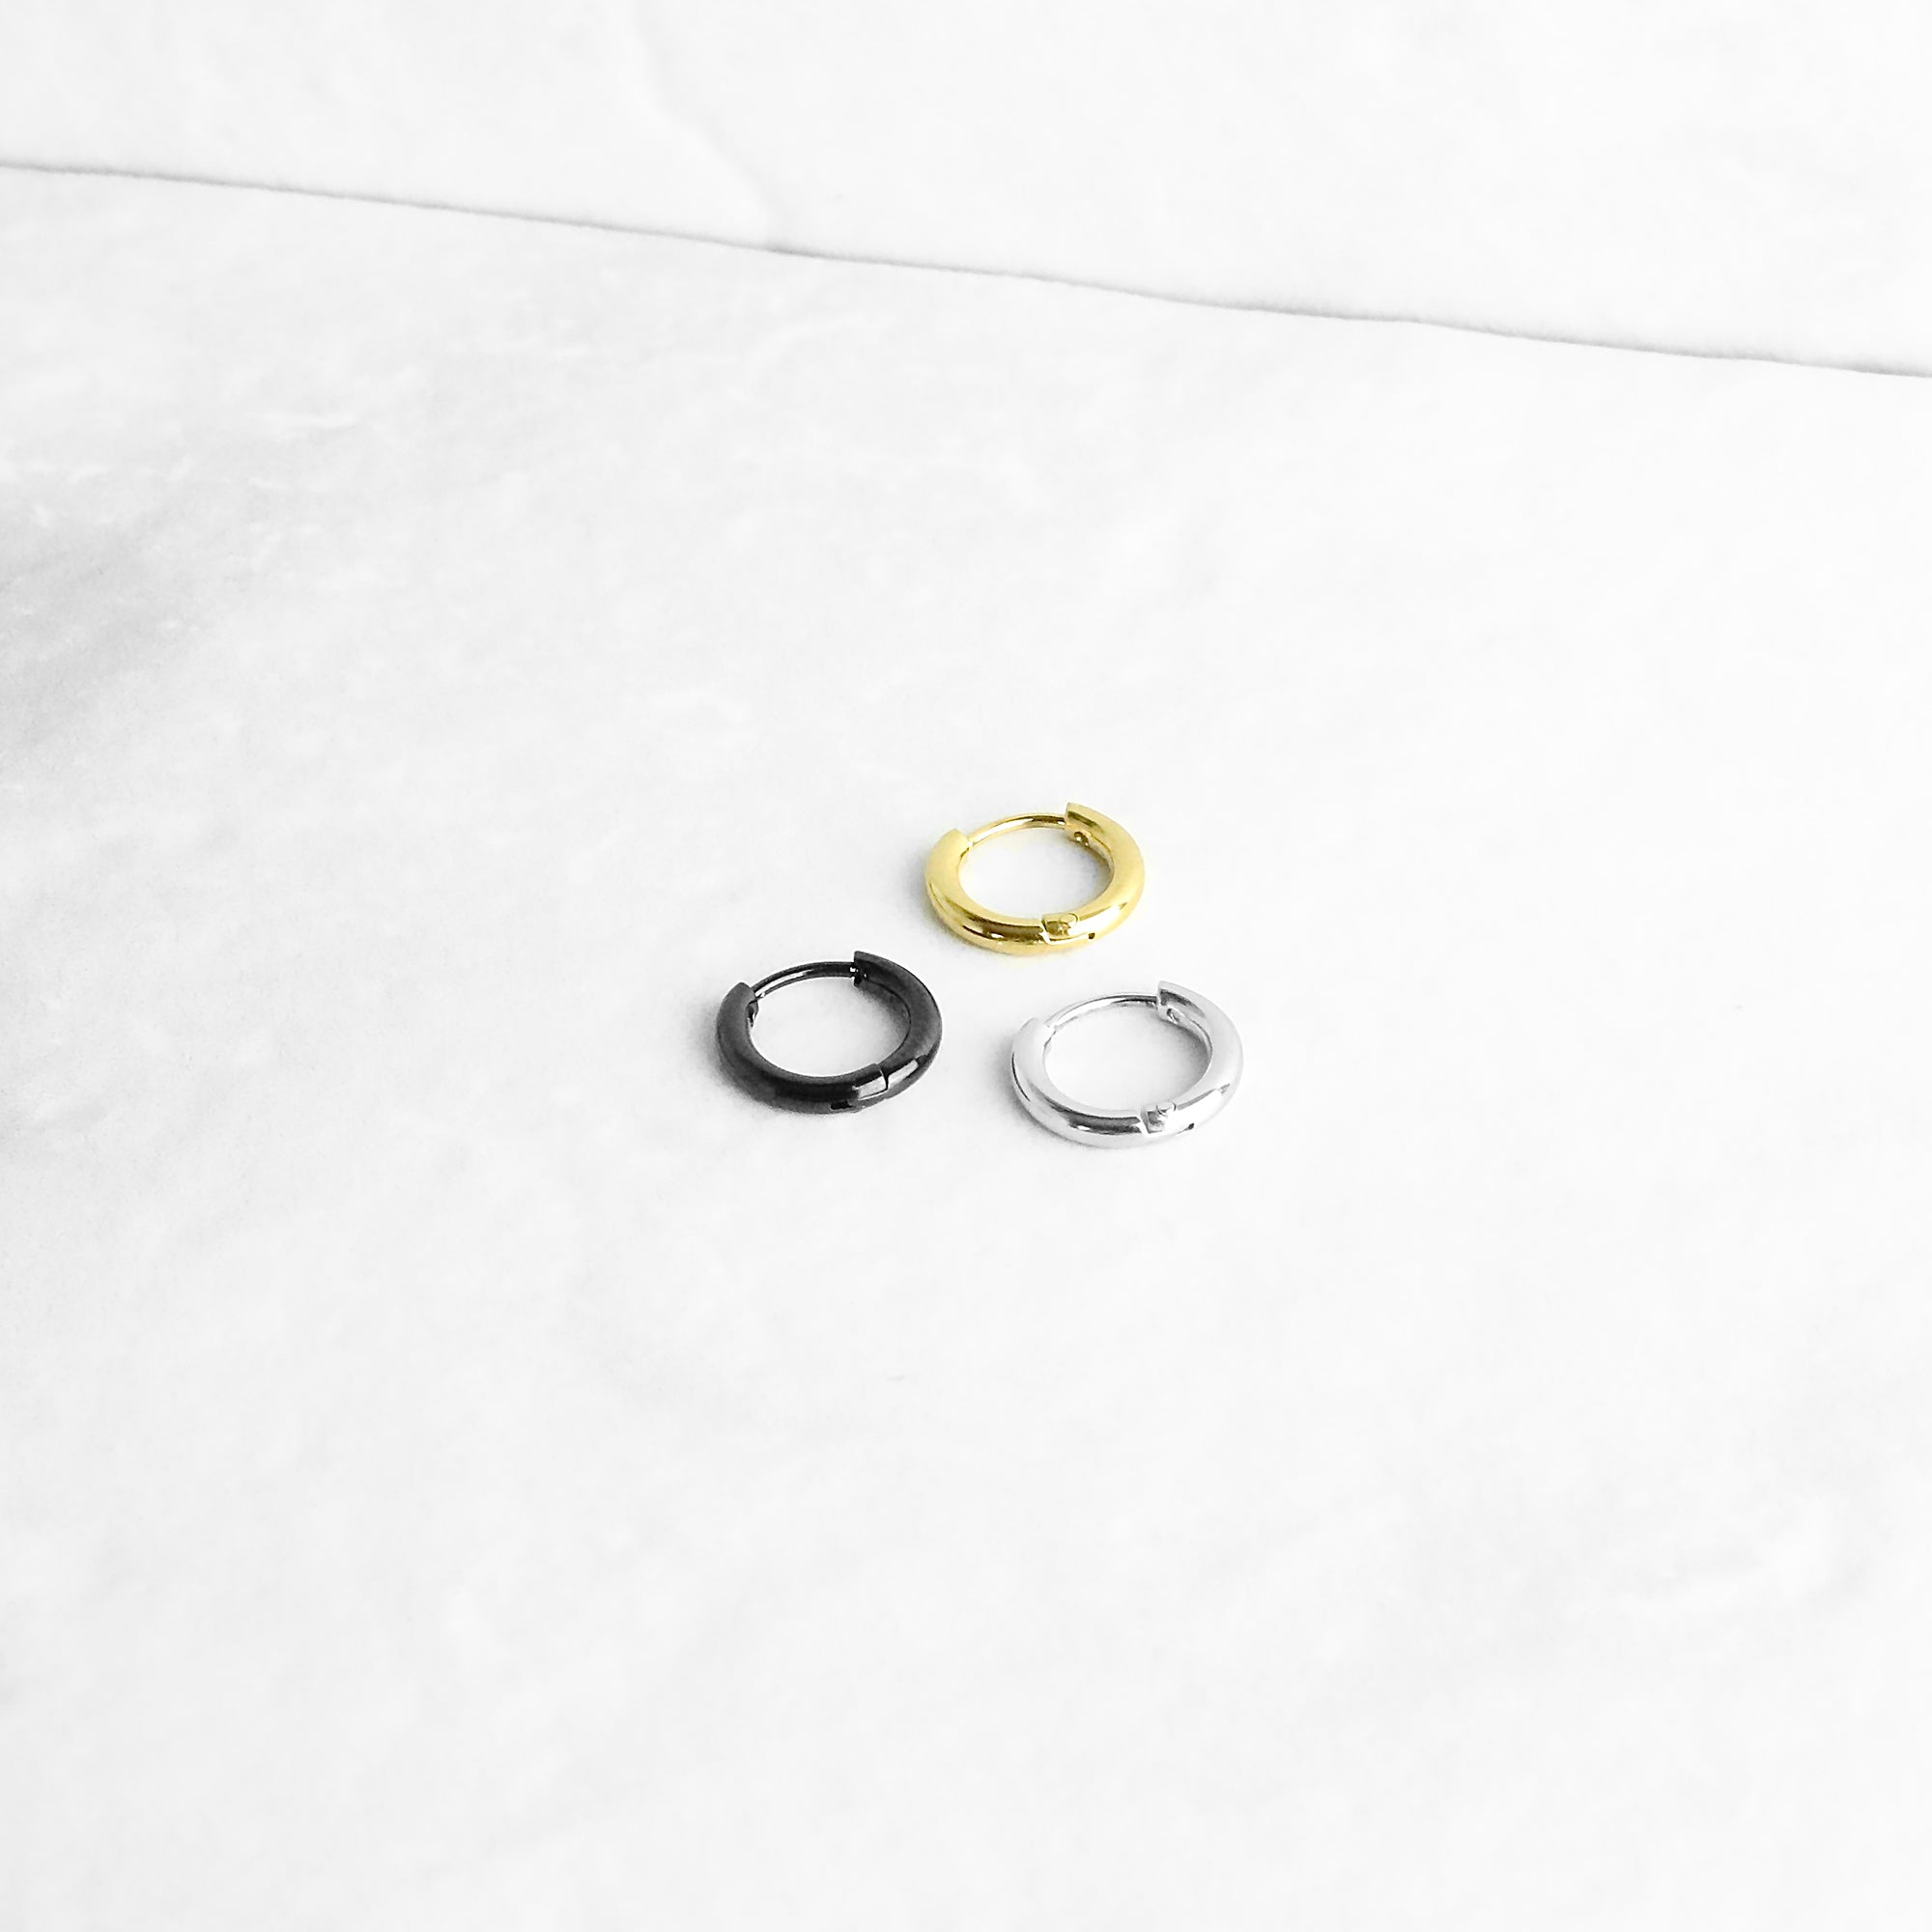 Minimal Round Earring - 2mm Gold